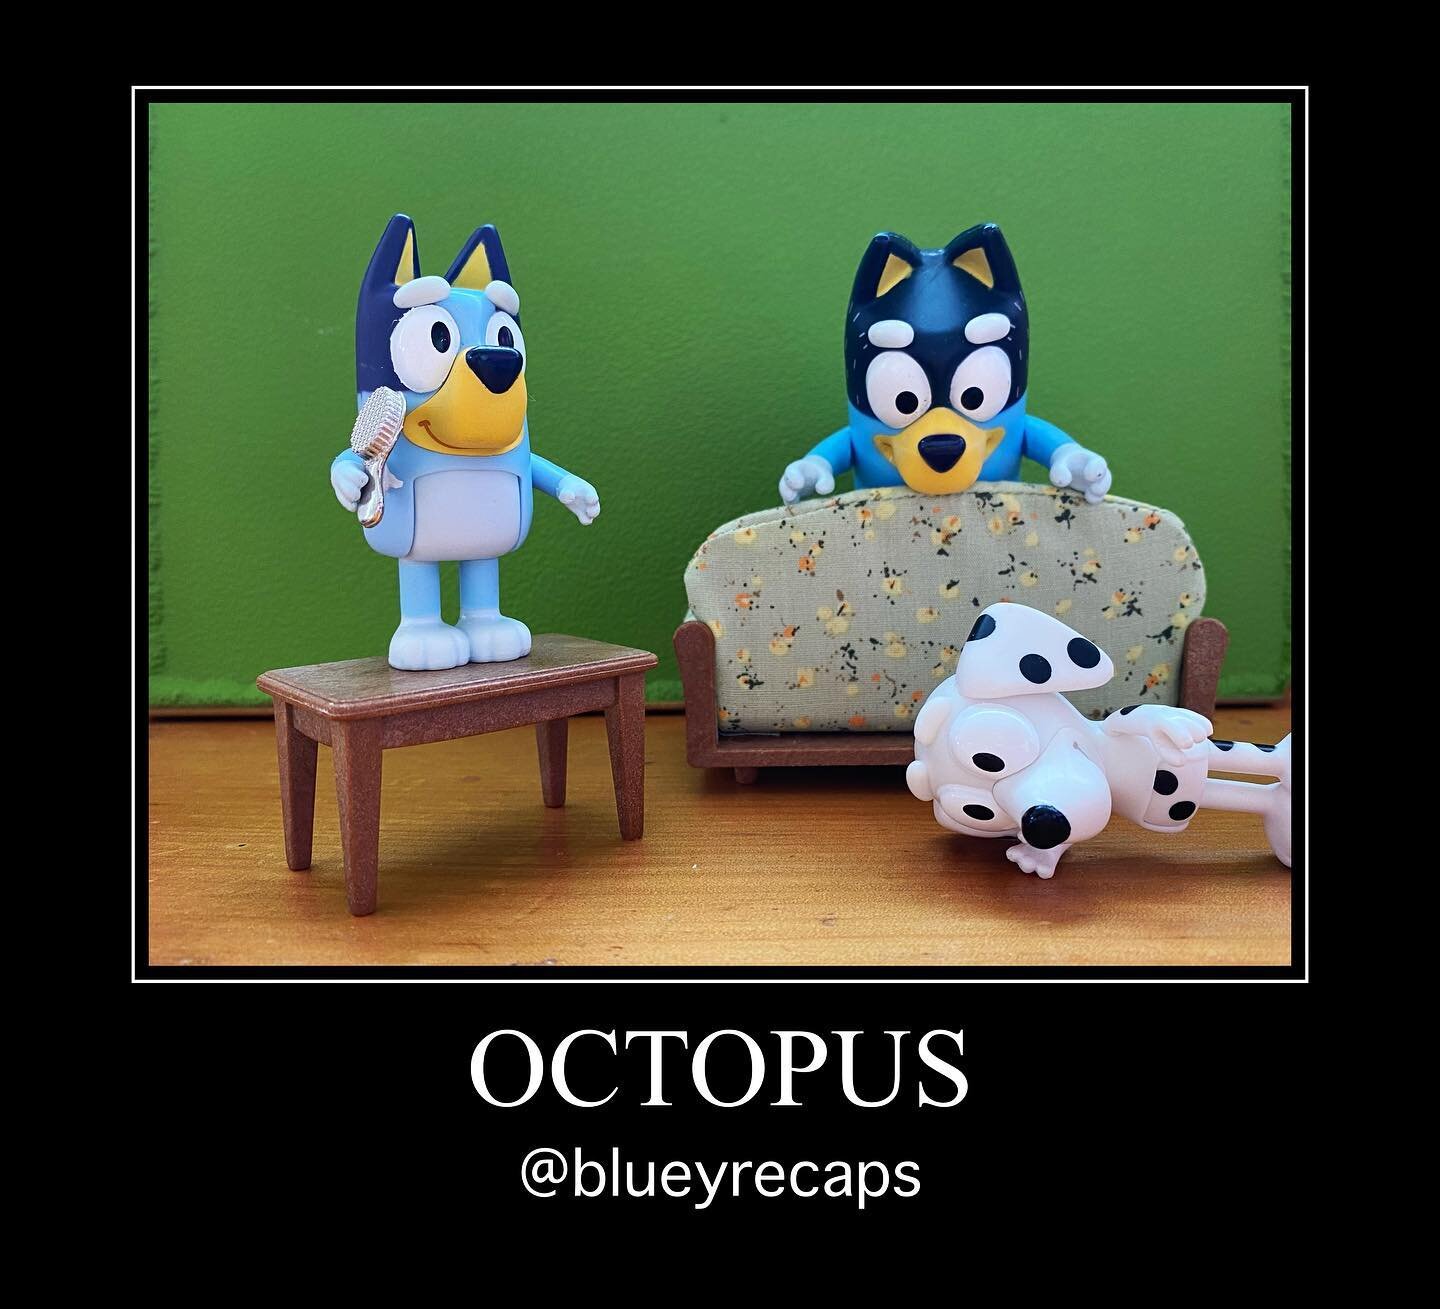 Bluey Recap: Octopus (#2.44)
#bestbits: Chloe&rsquo;s Dad #nerdburger
#lifelesson: Octopi have tentacles, and a family that nerds together, stays together
.
Chloe is at The Heeler&rsquo;s house having a play date with Bluey. They are setting up to pl